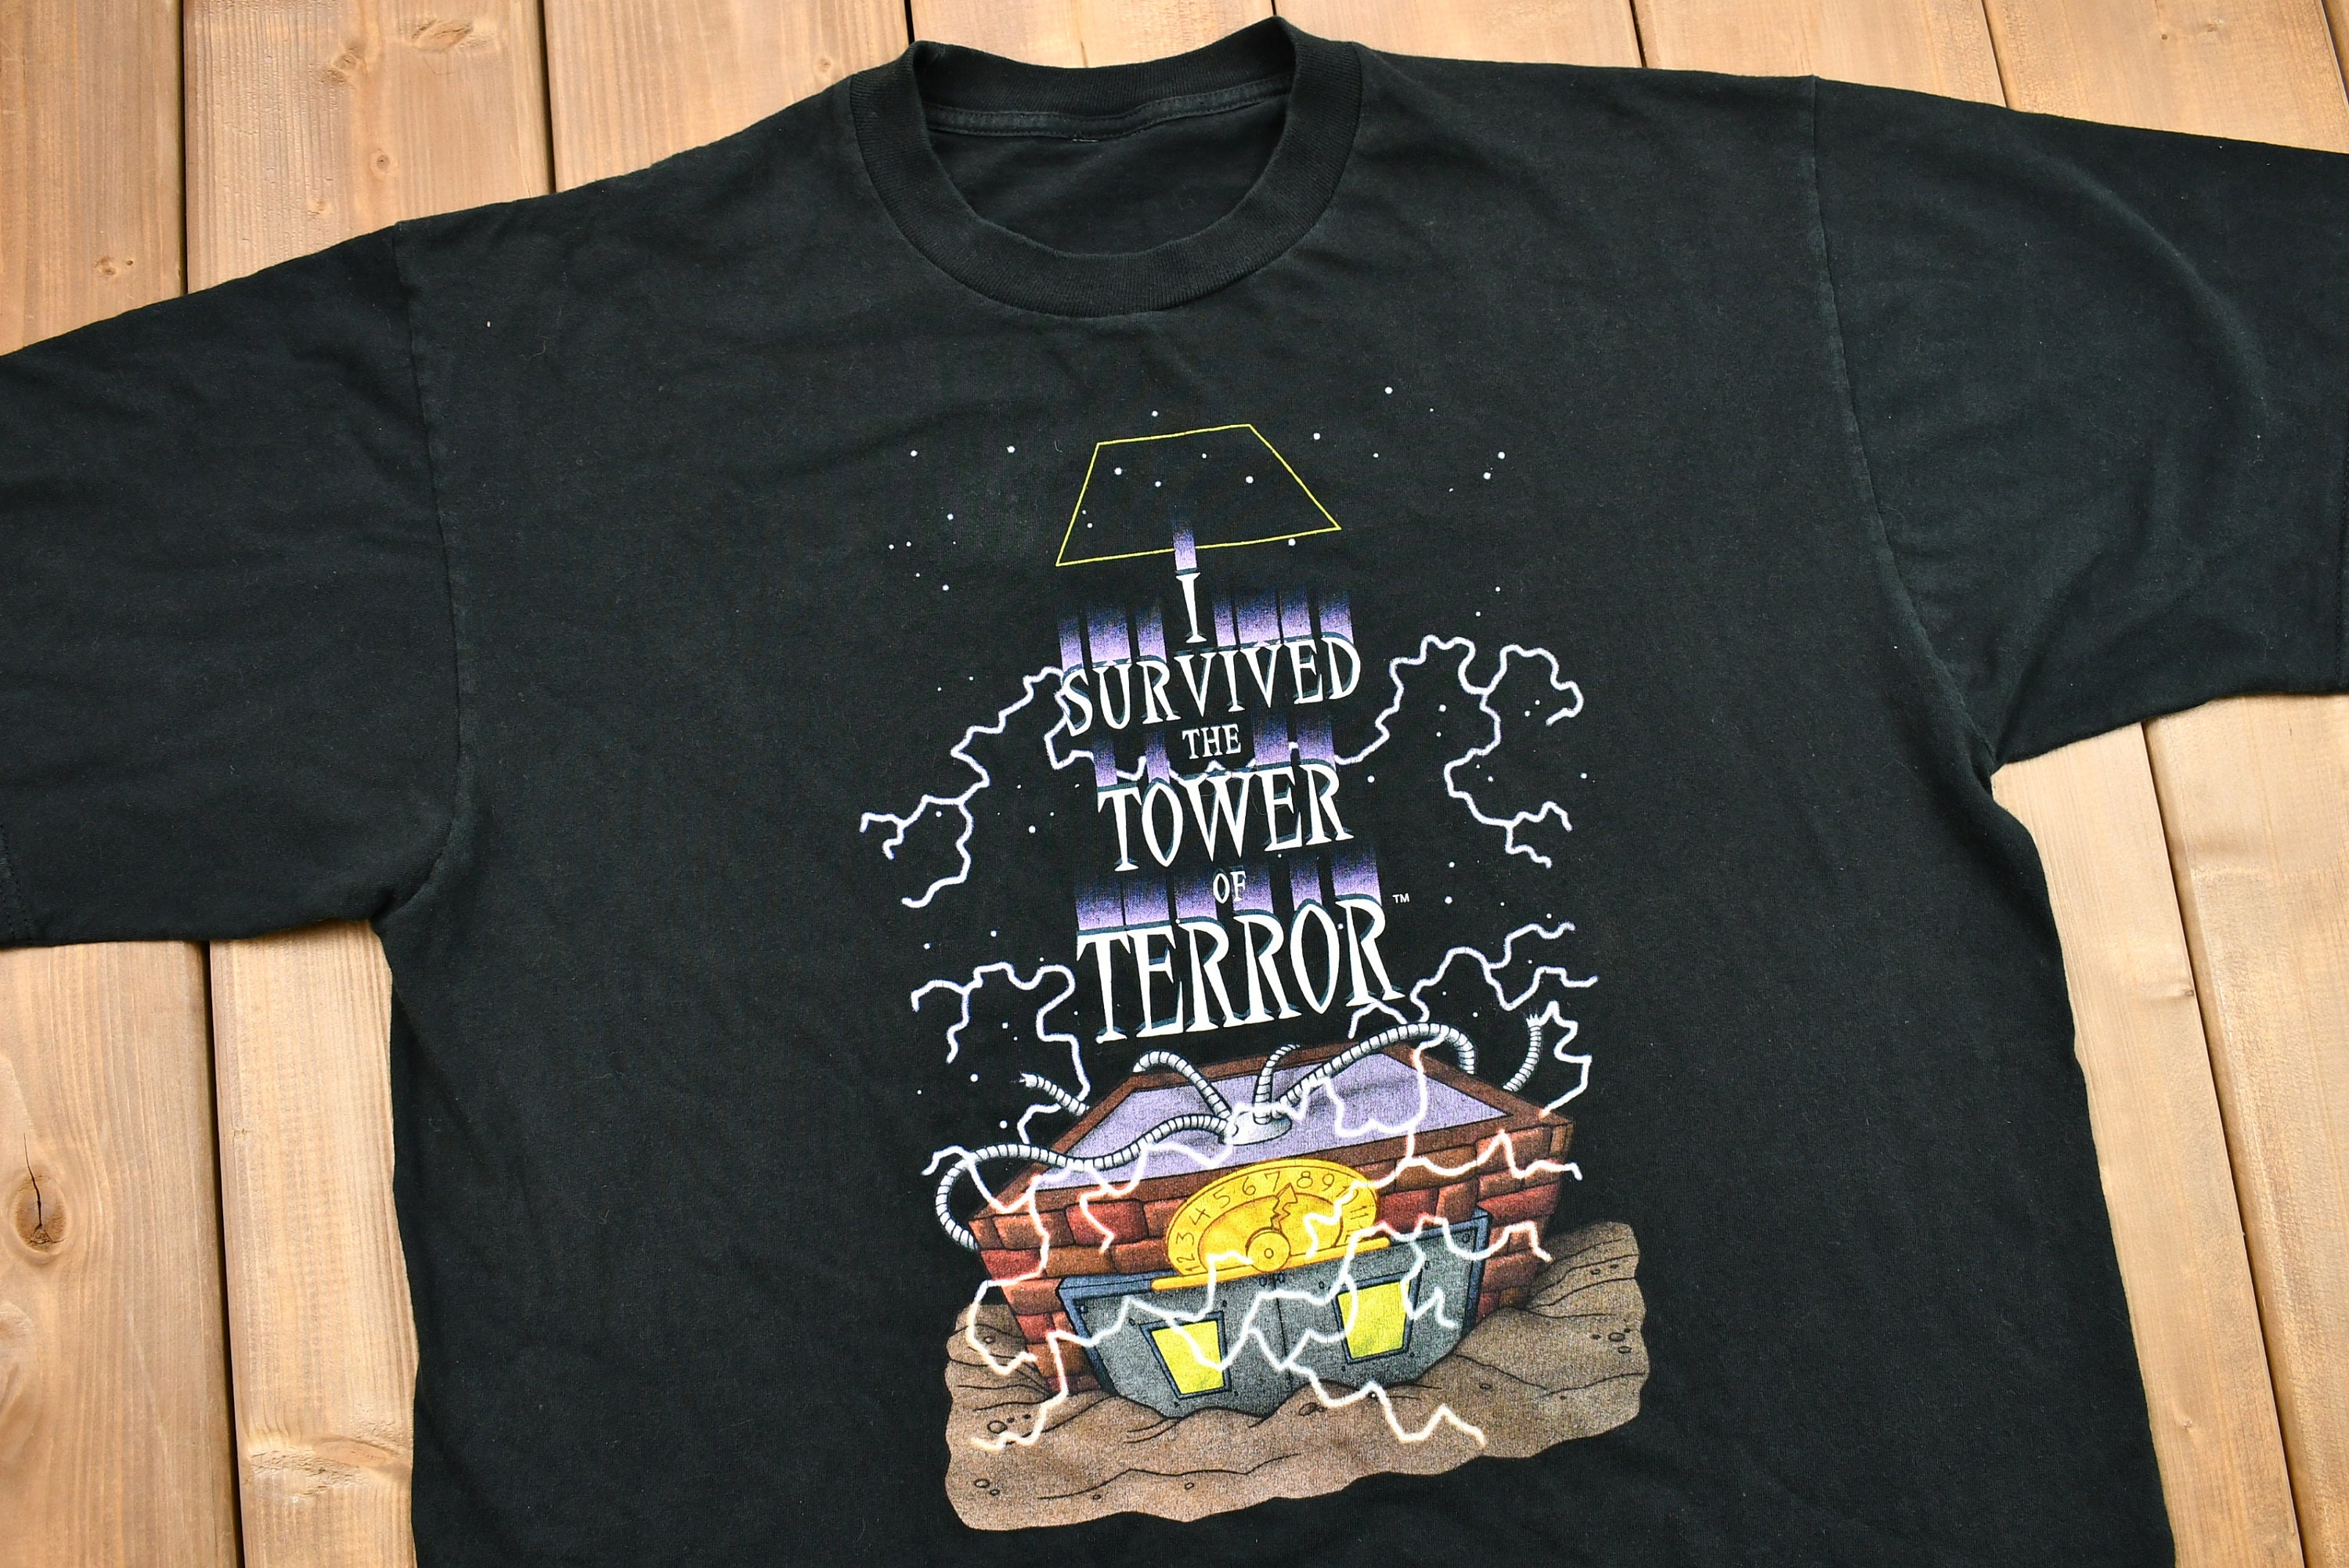 Vintage 1990s I Survived the Tower of Terror Graphic T-shirt / - Etsy